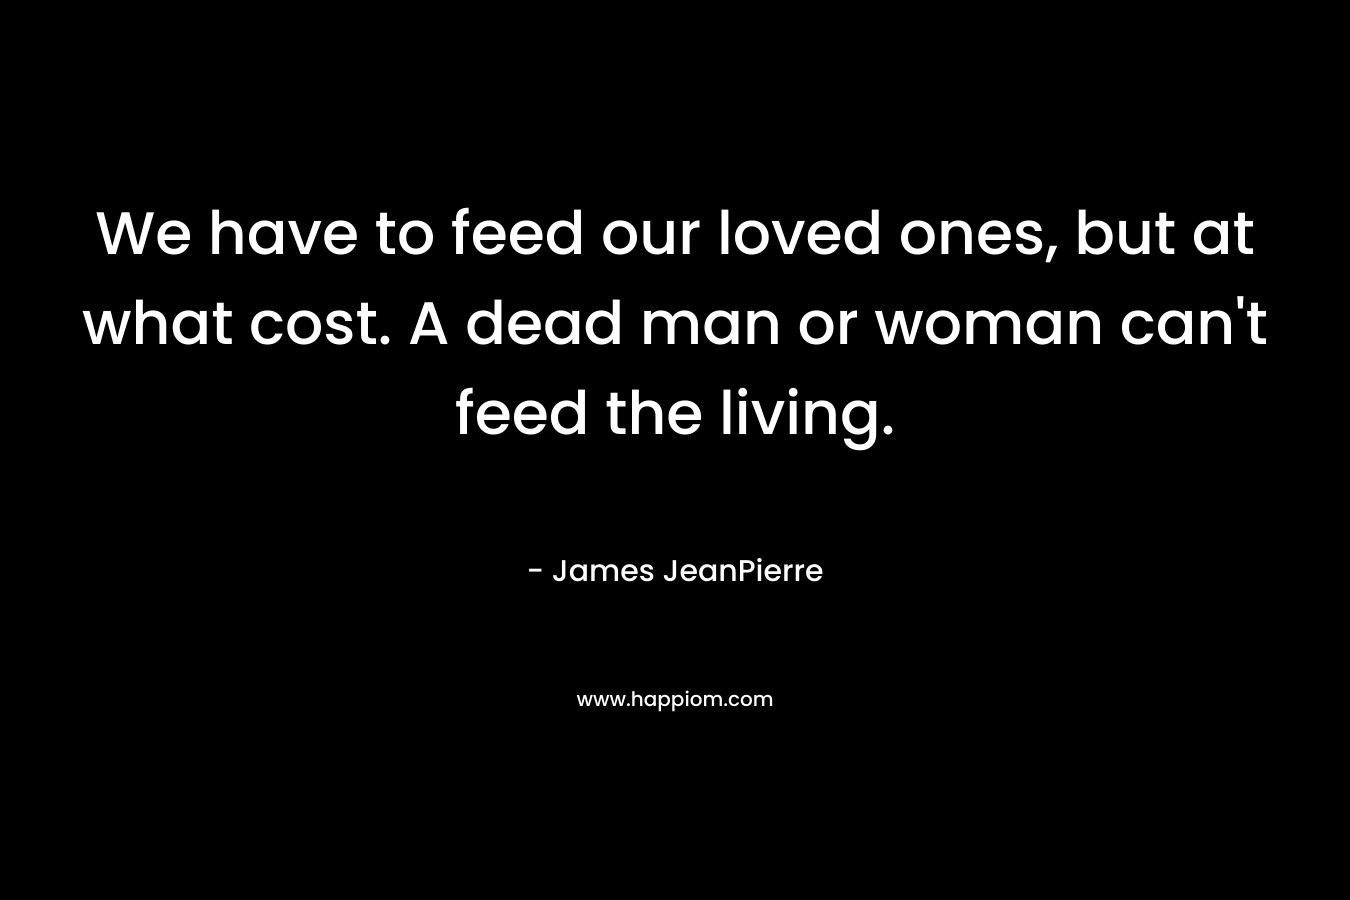 We have to feed our loved ones, but at what cost. A dead man or woman can’t feed the living. – James JeanPierre